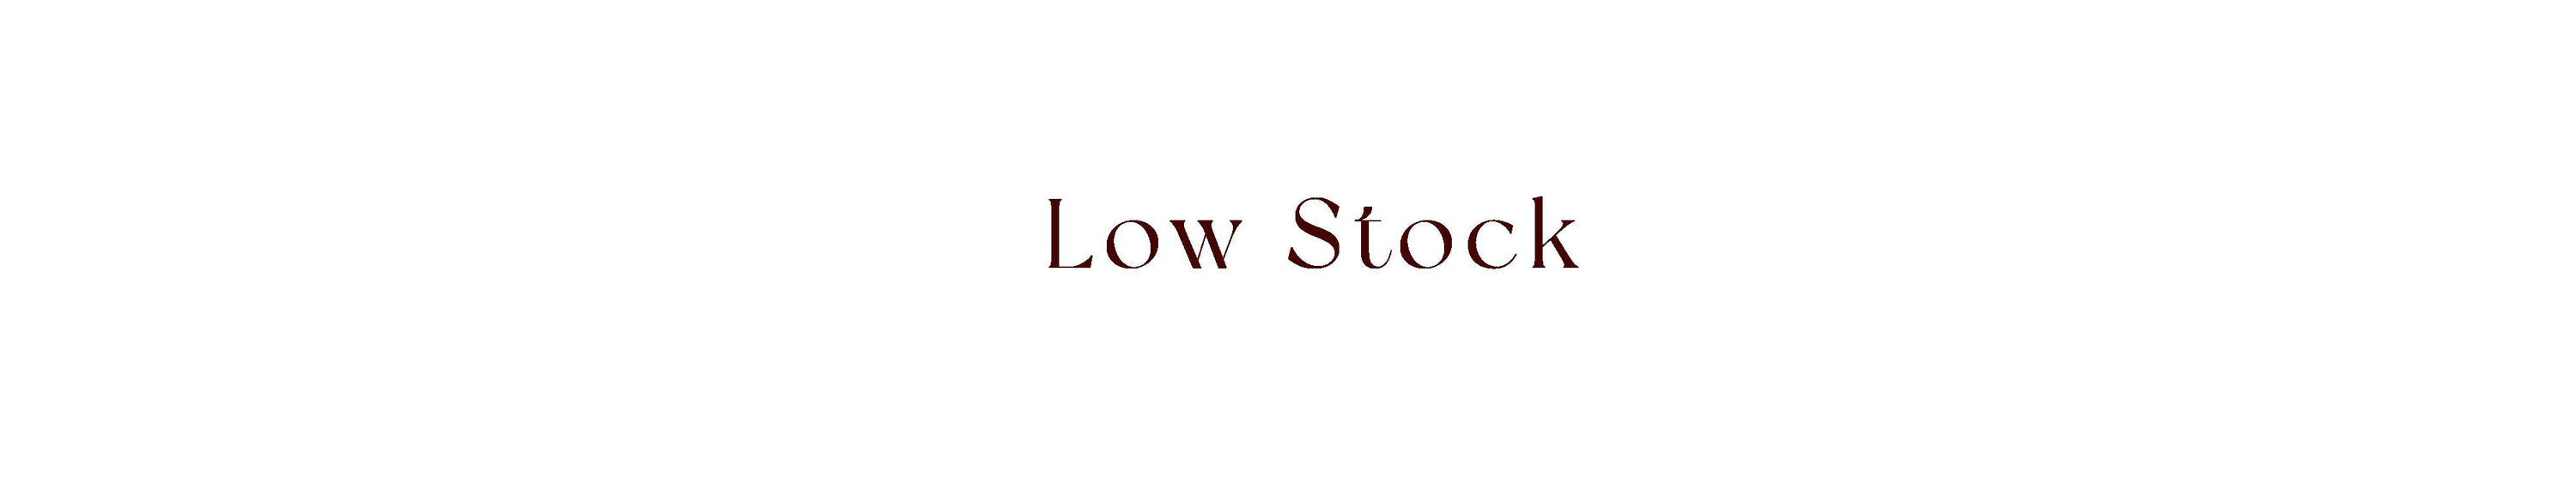 Low Stock - NUJUAL, Inc.